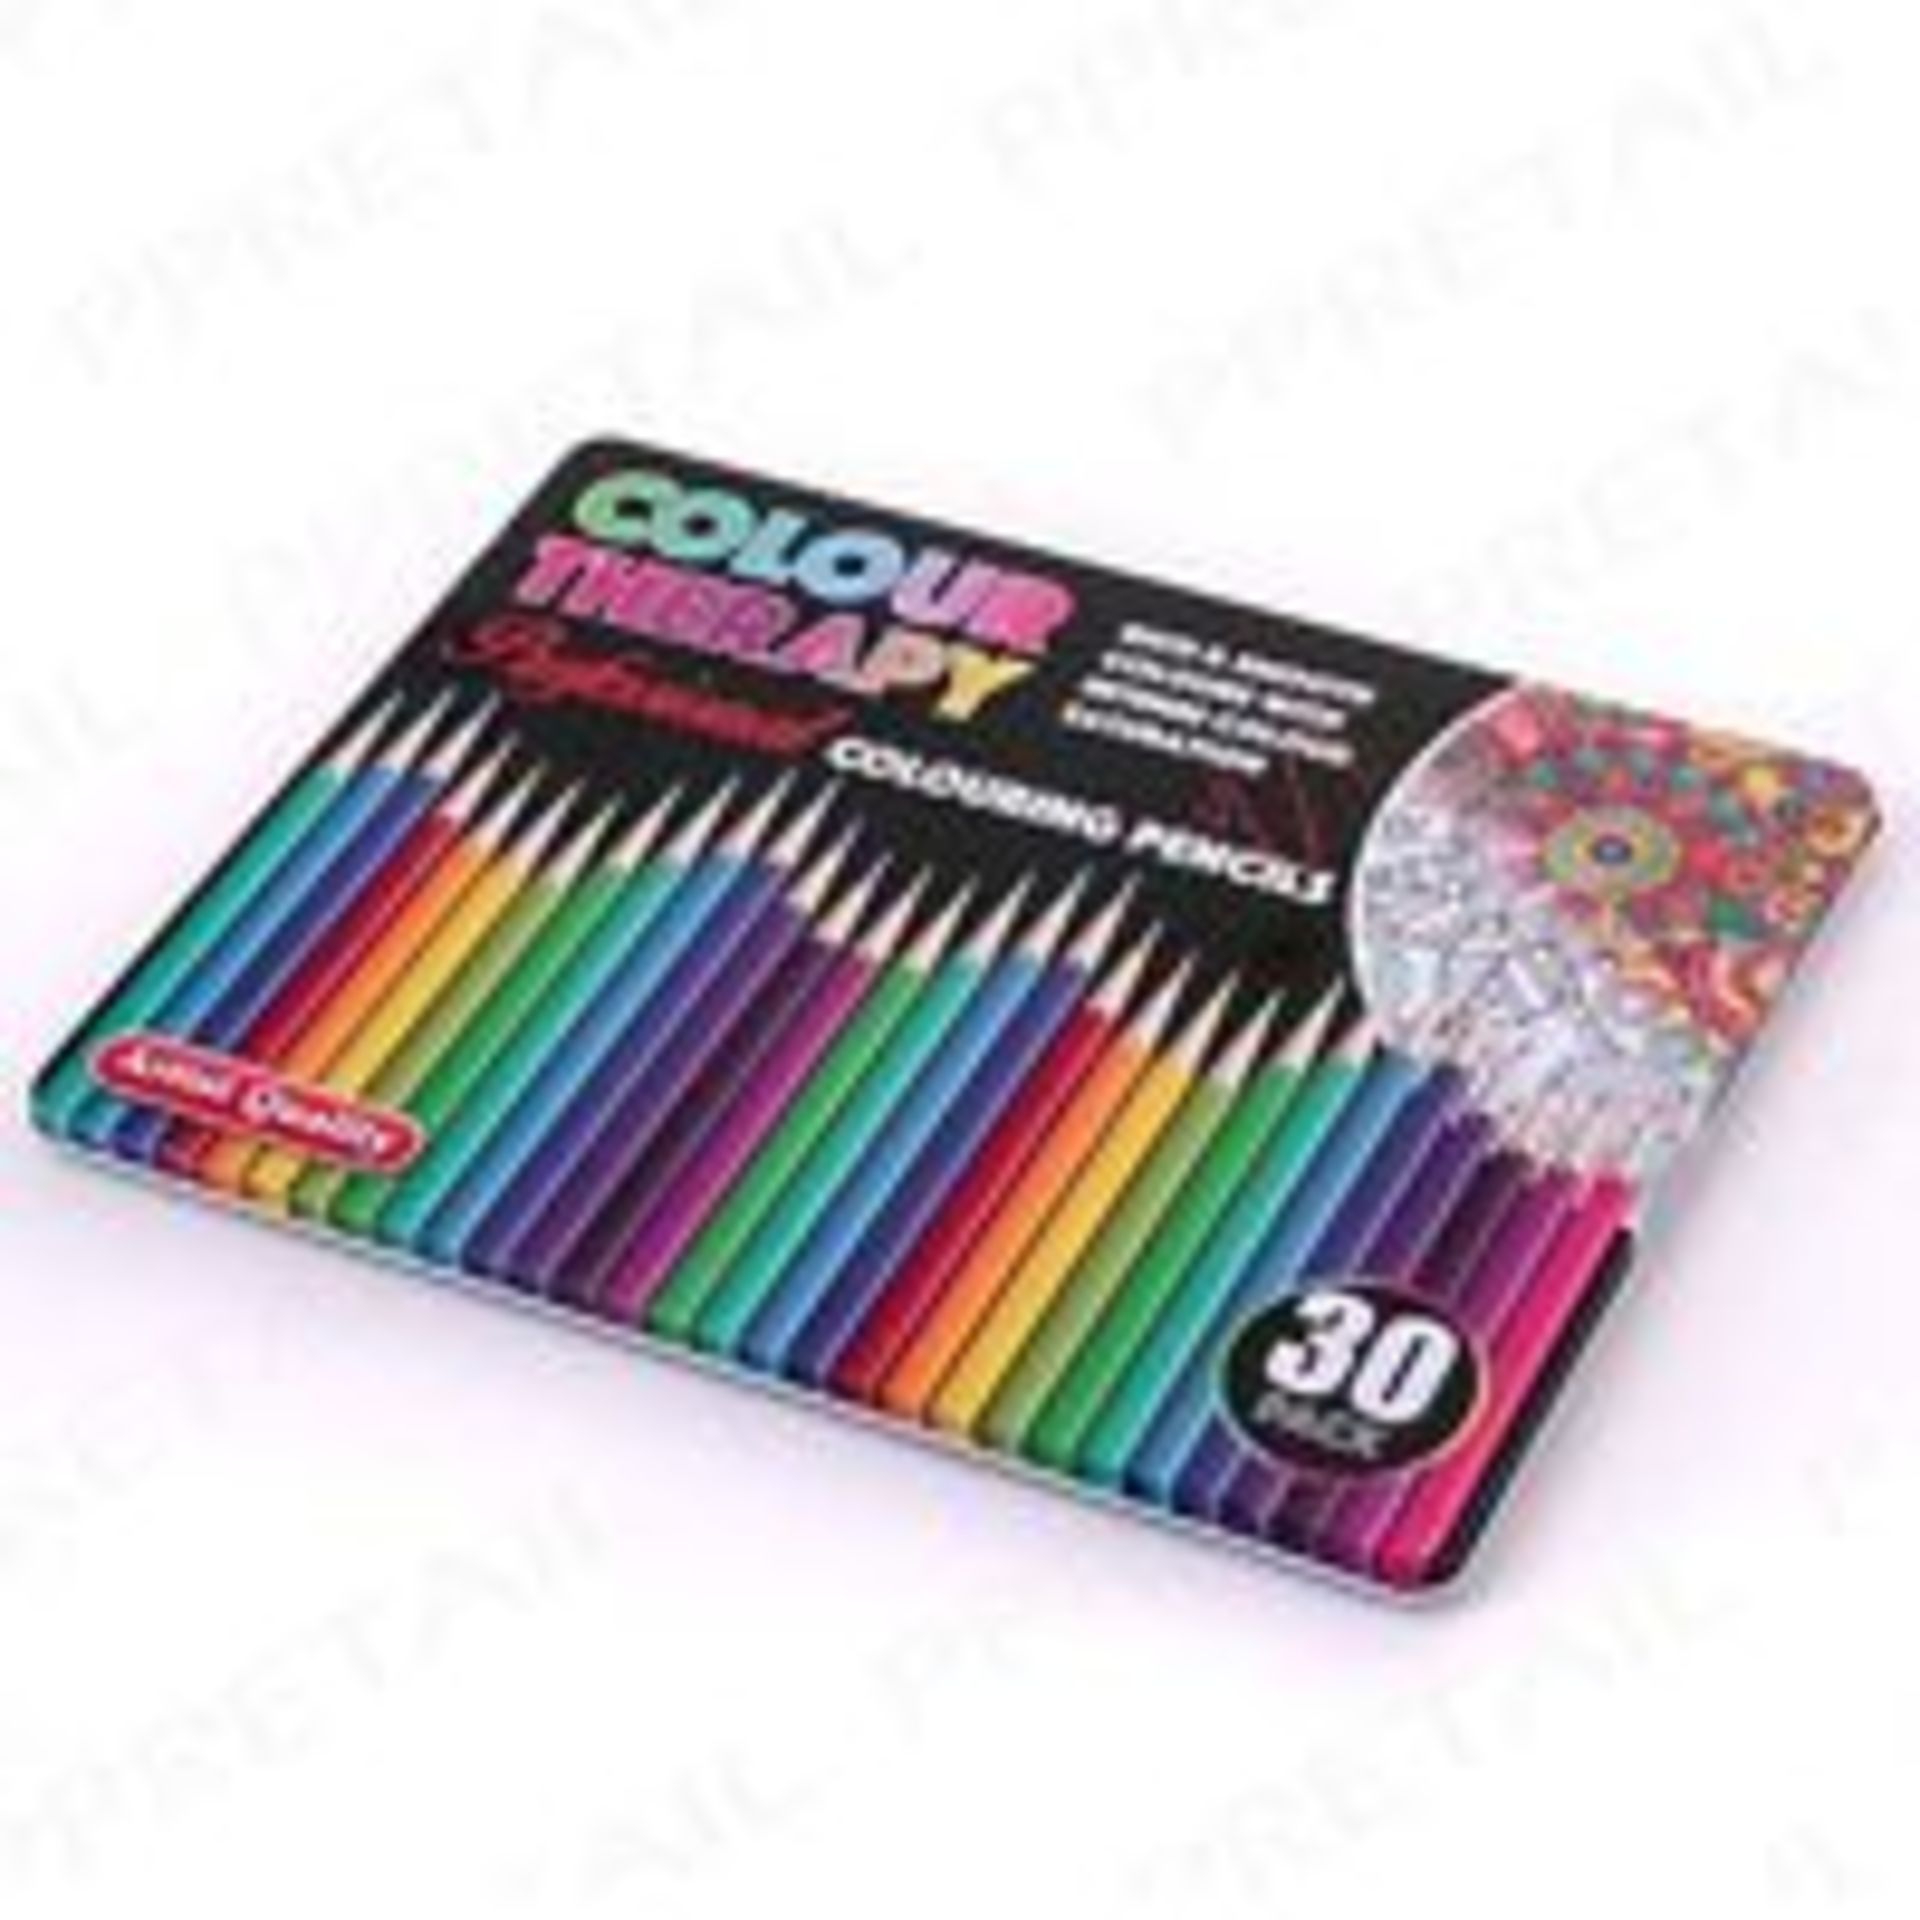 V Brand New 30 Pack Professional Colouring Pencils - Artist Quality